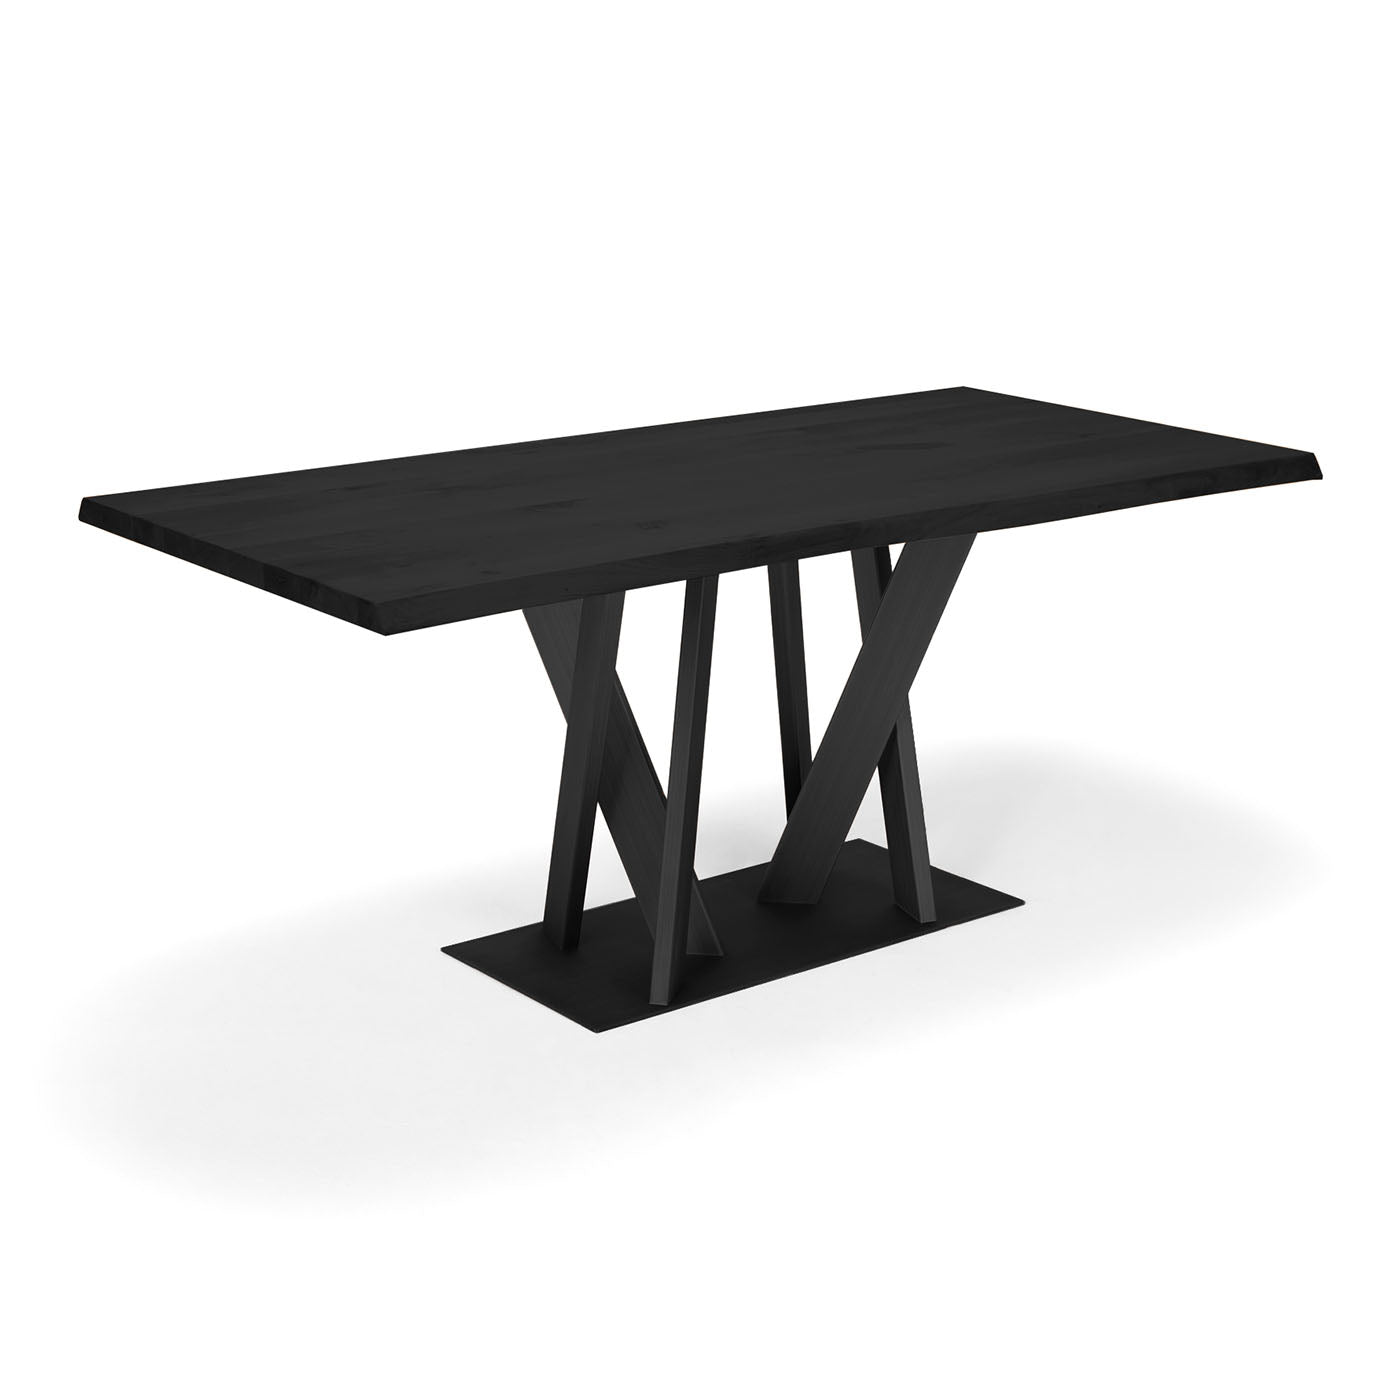 Tree Wood and Black Steel Dining Table by Luca Roccadadria - Alternative view 1